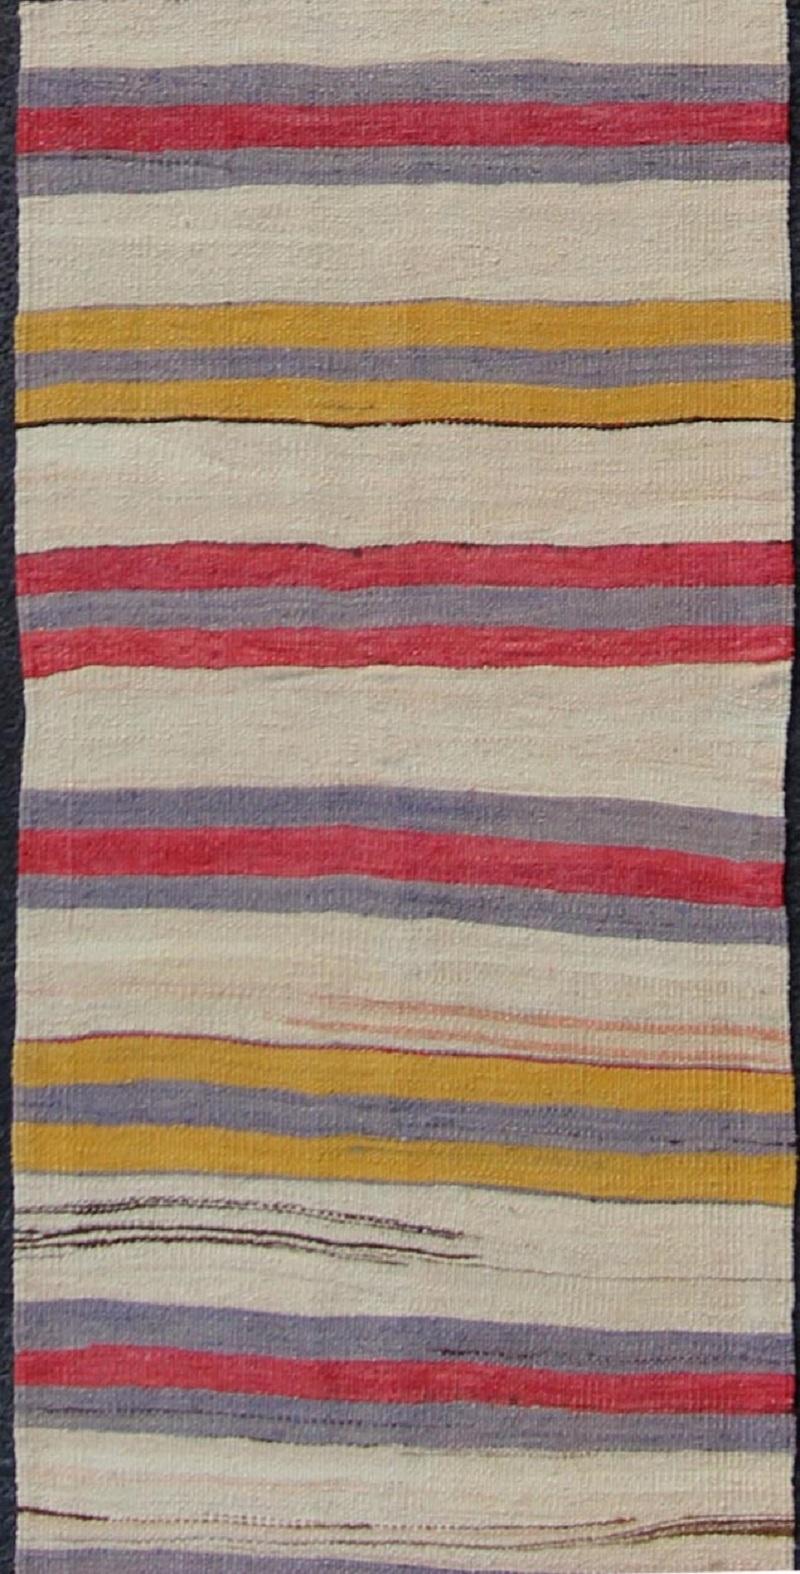 Yellow, red, ivory, and gray stripe design flat-weave vintage runner from Turkey, rug en-165311, country of origin / type: Iran / Kilim, circa 1950.

Featuring a dynamic stripe design, this unique 1950s Kilim runner showcases an array of vibrant